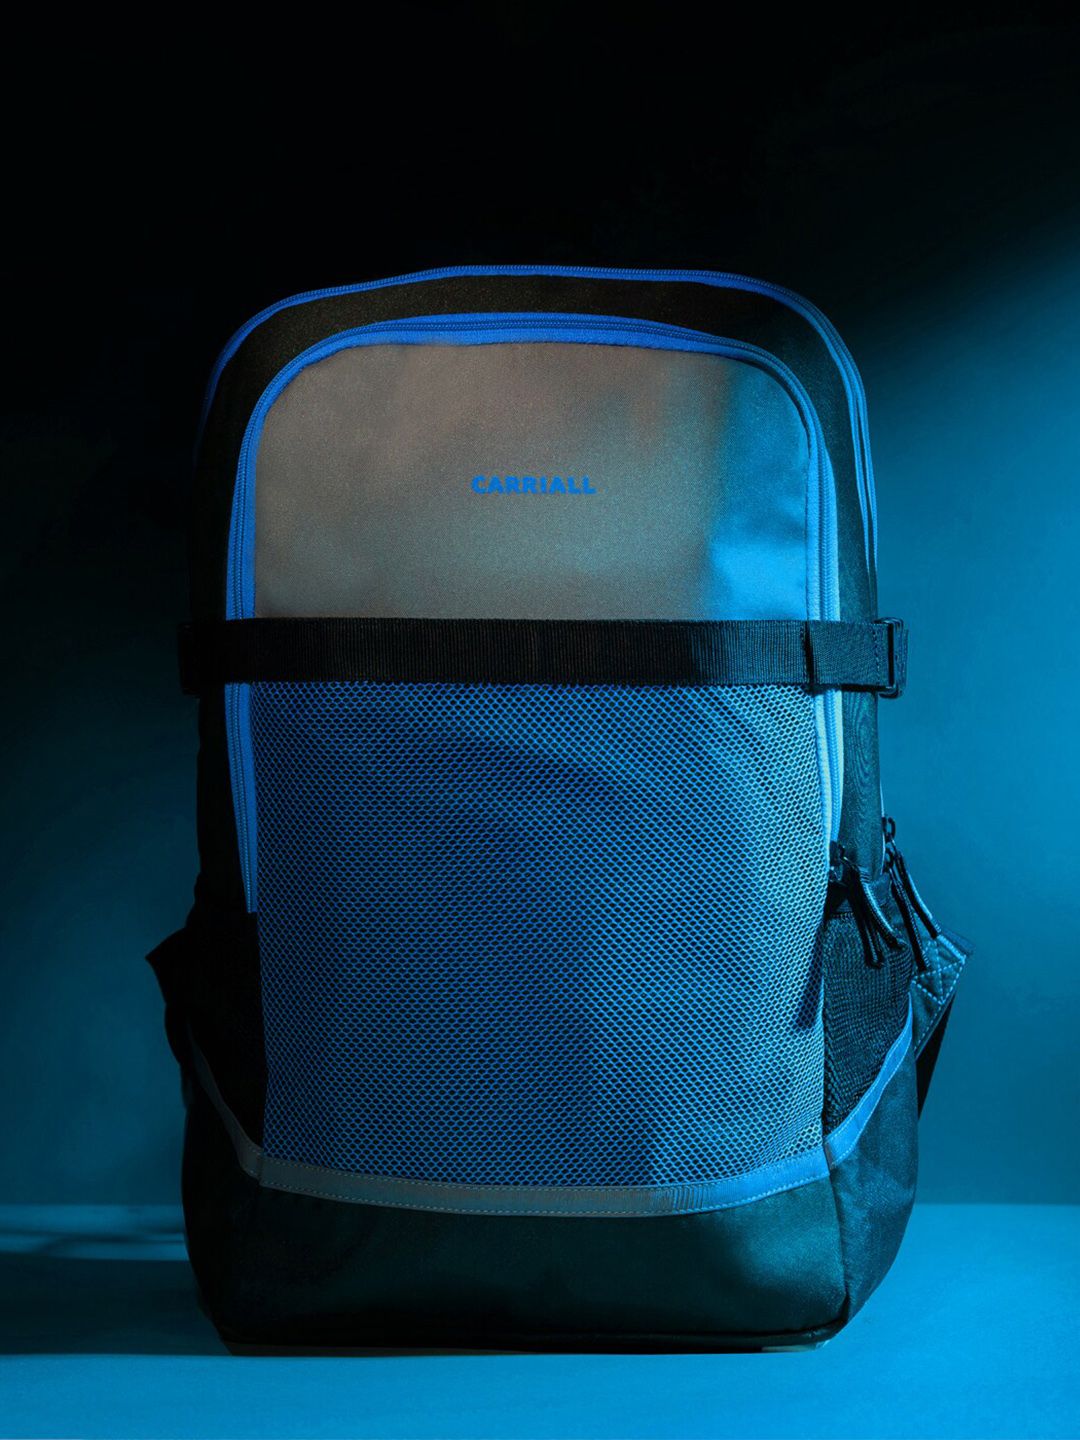 CARRIALL Unisex Blue & Black Backpack with Reflective Strip Price in India